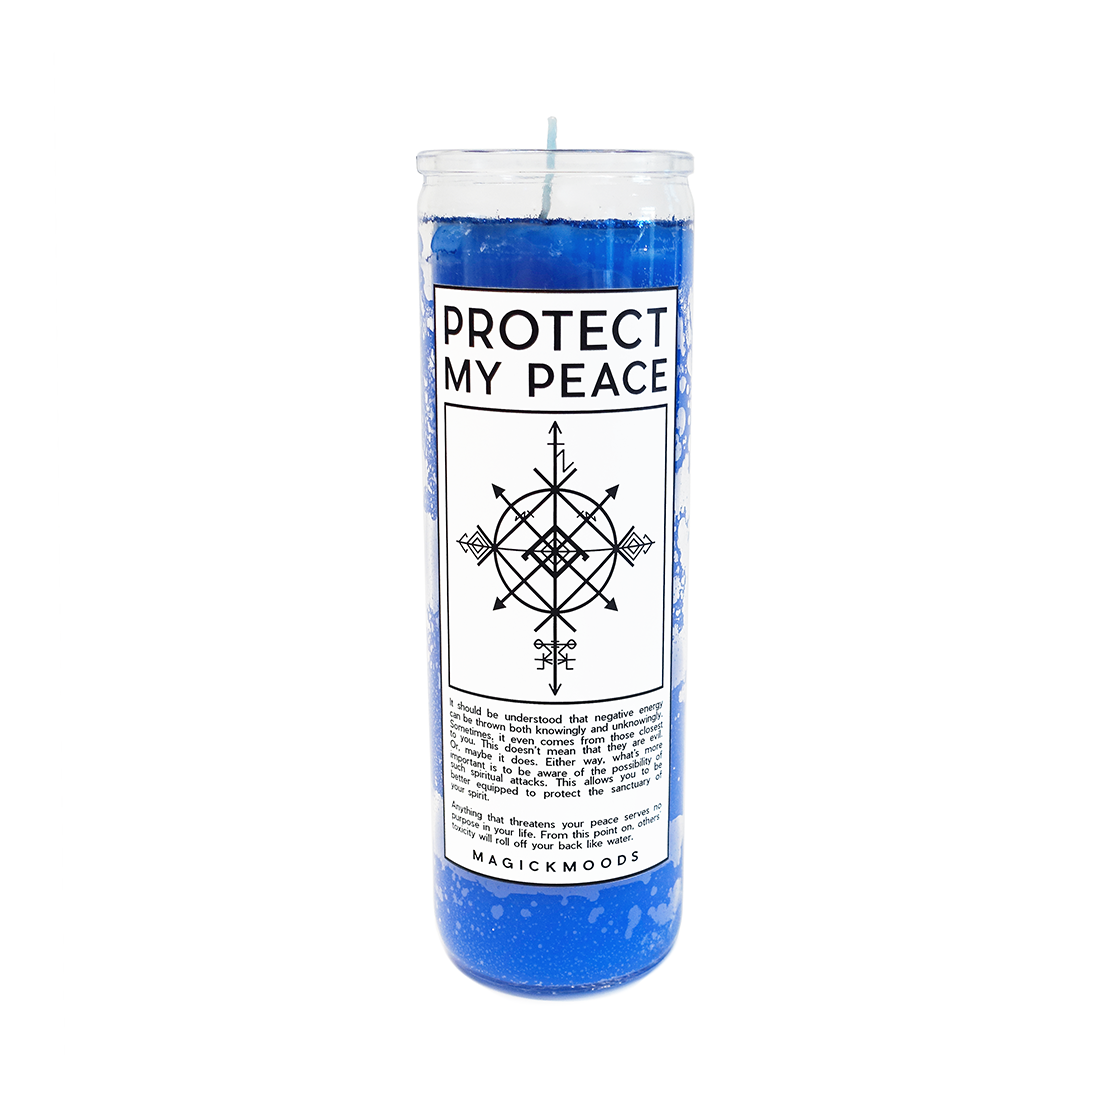 Protect My Peace 7-Day Meditation Candle - PREORDER- Ships by July 28th, 2023